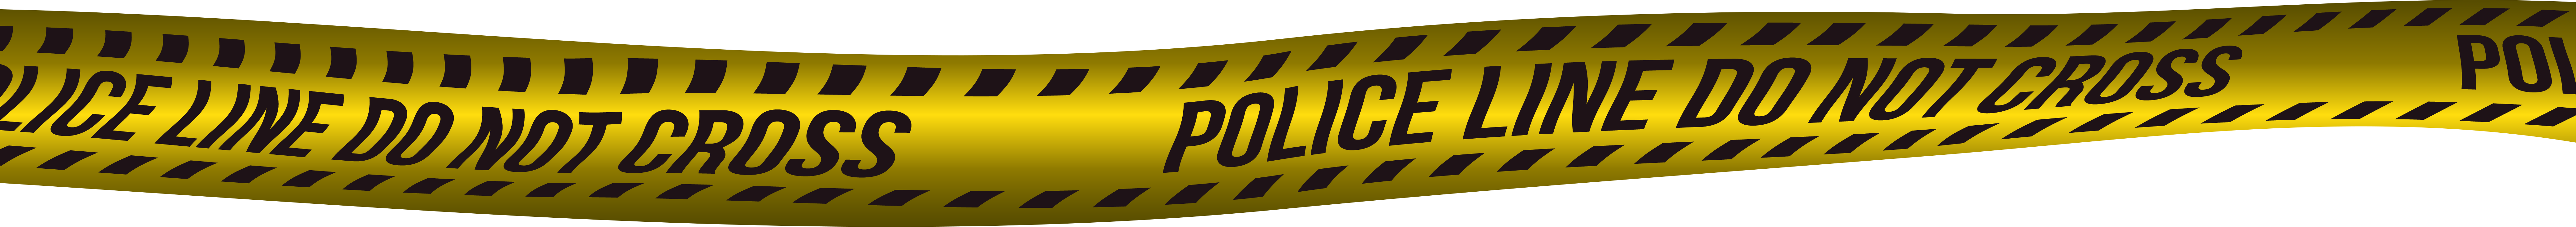 Police Tape Background PNG Image